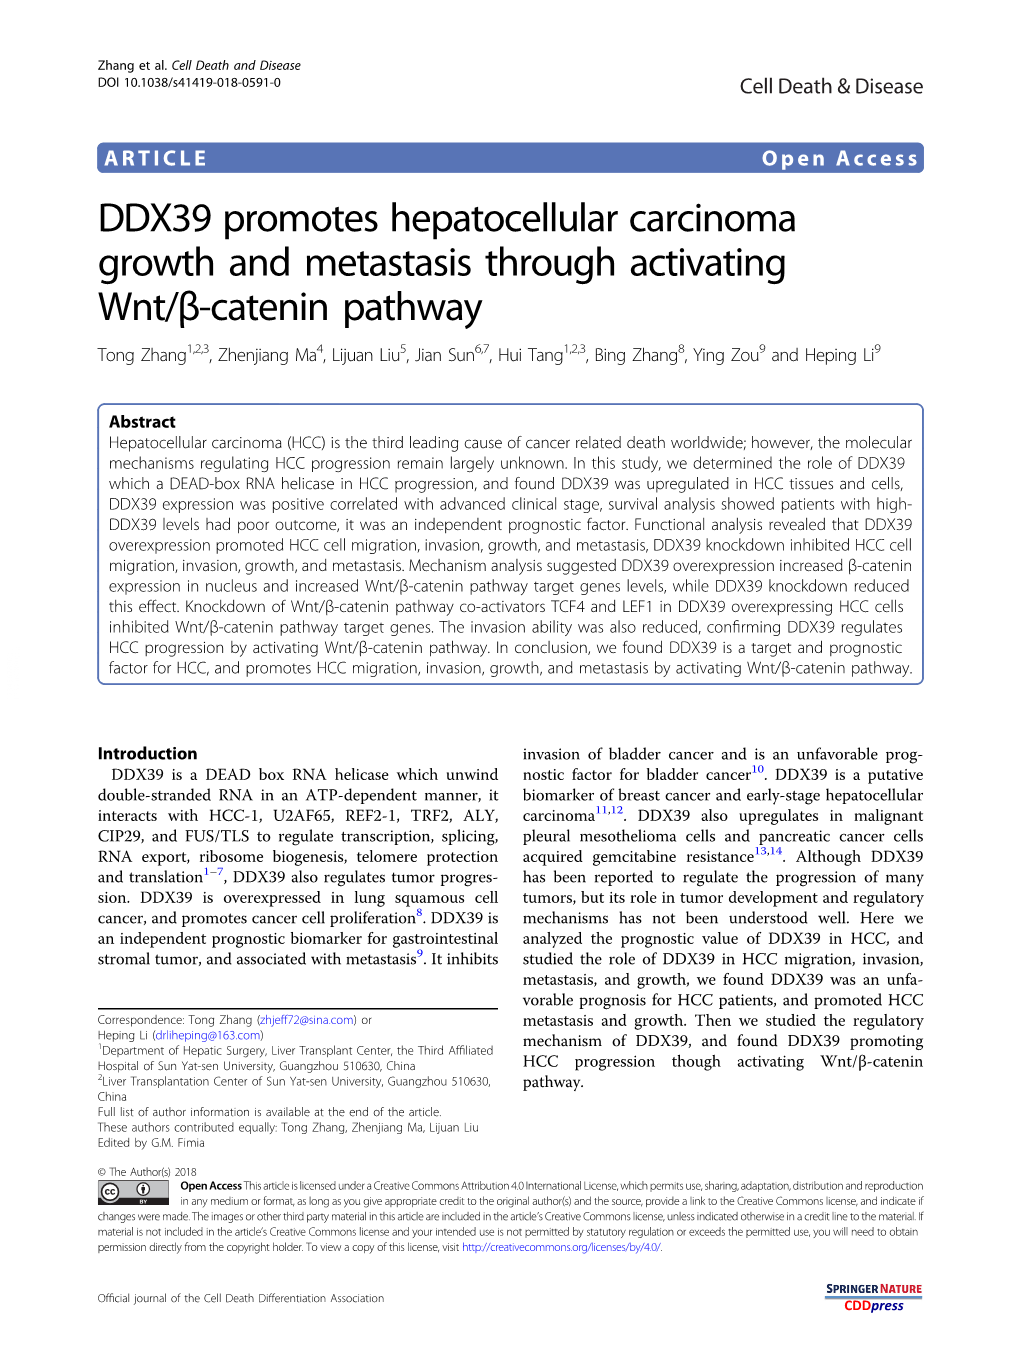 DDX39 Promotes Hepatocellular Carcinoma Growth and Metastasis